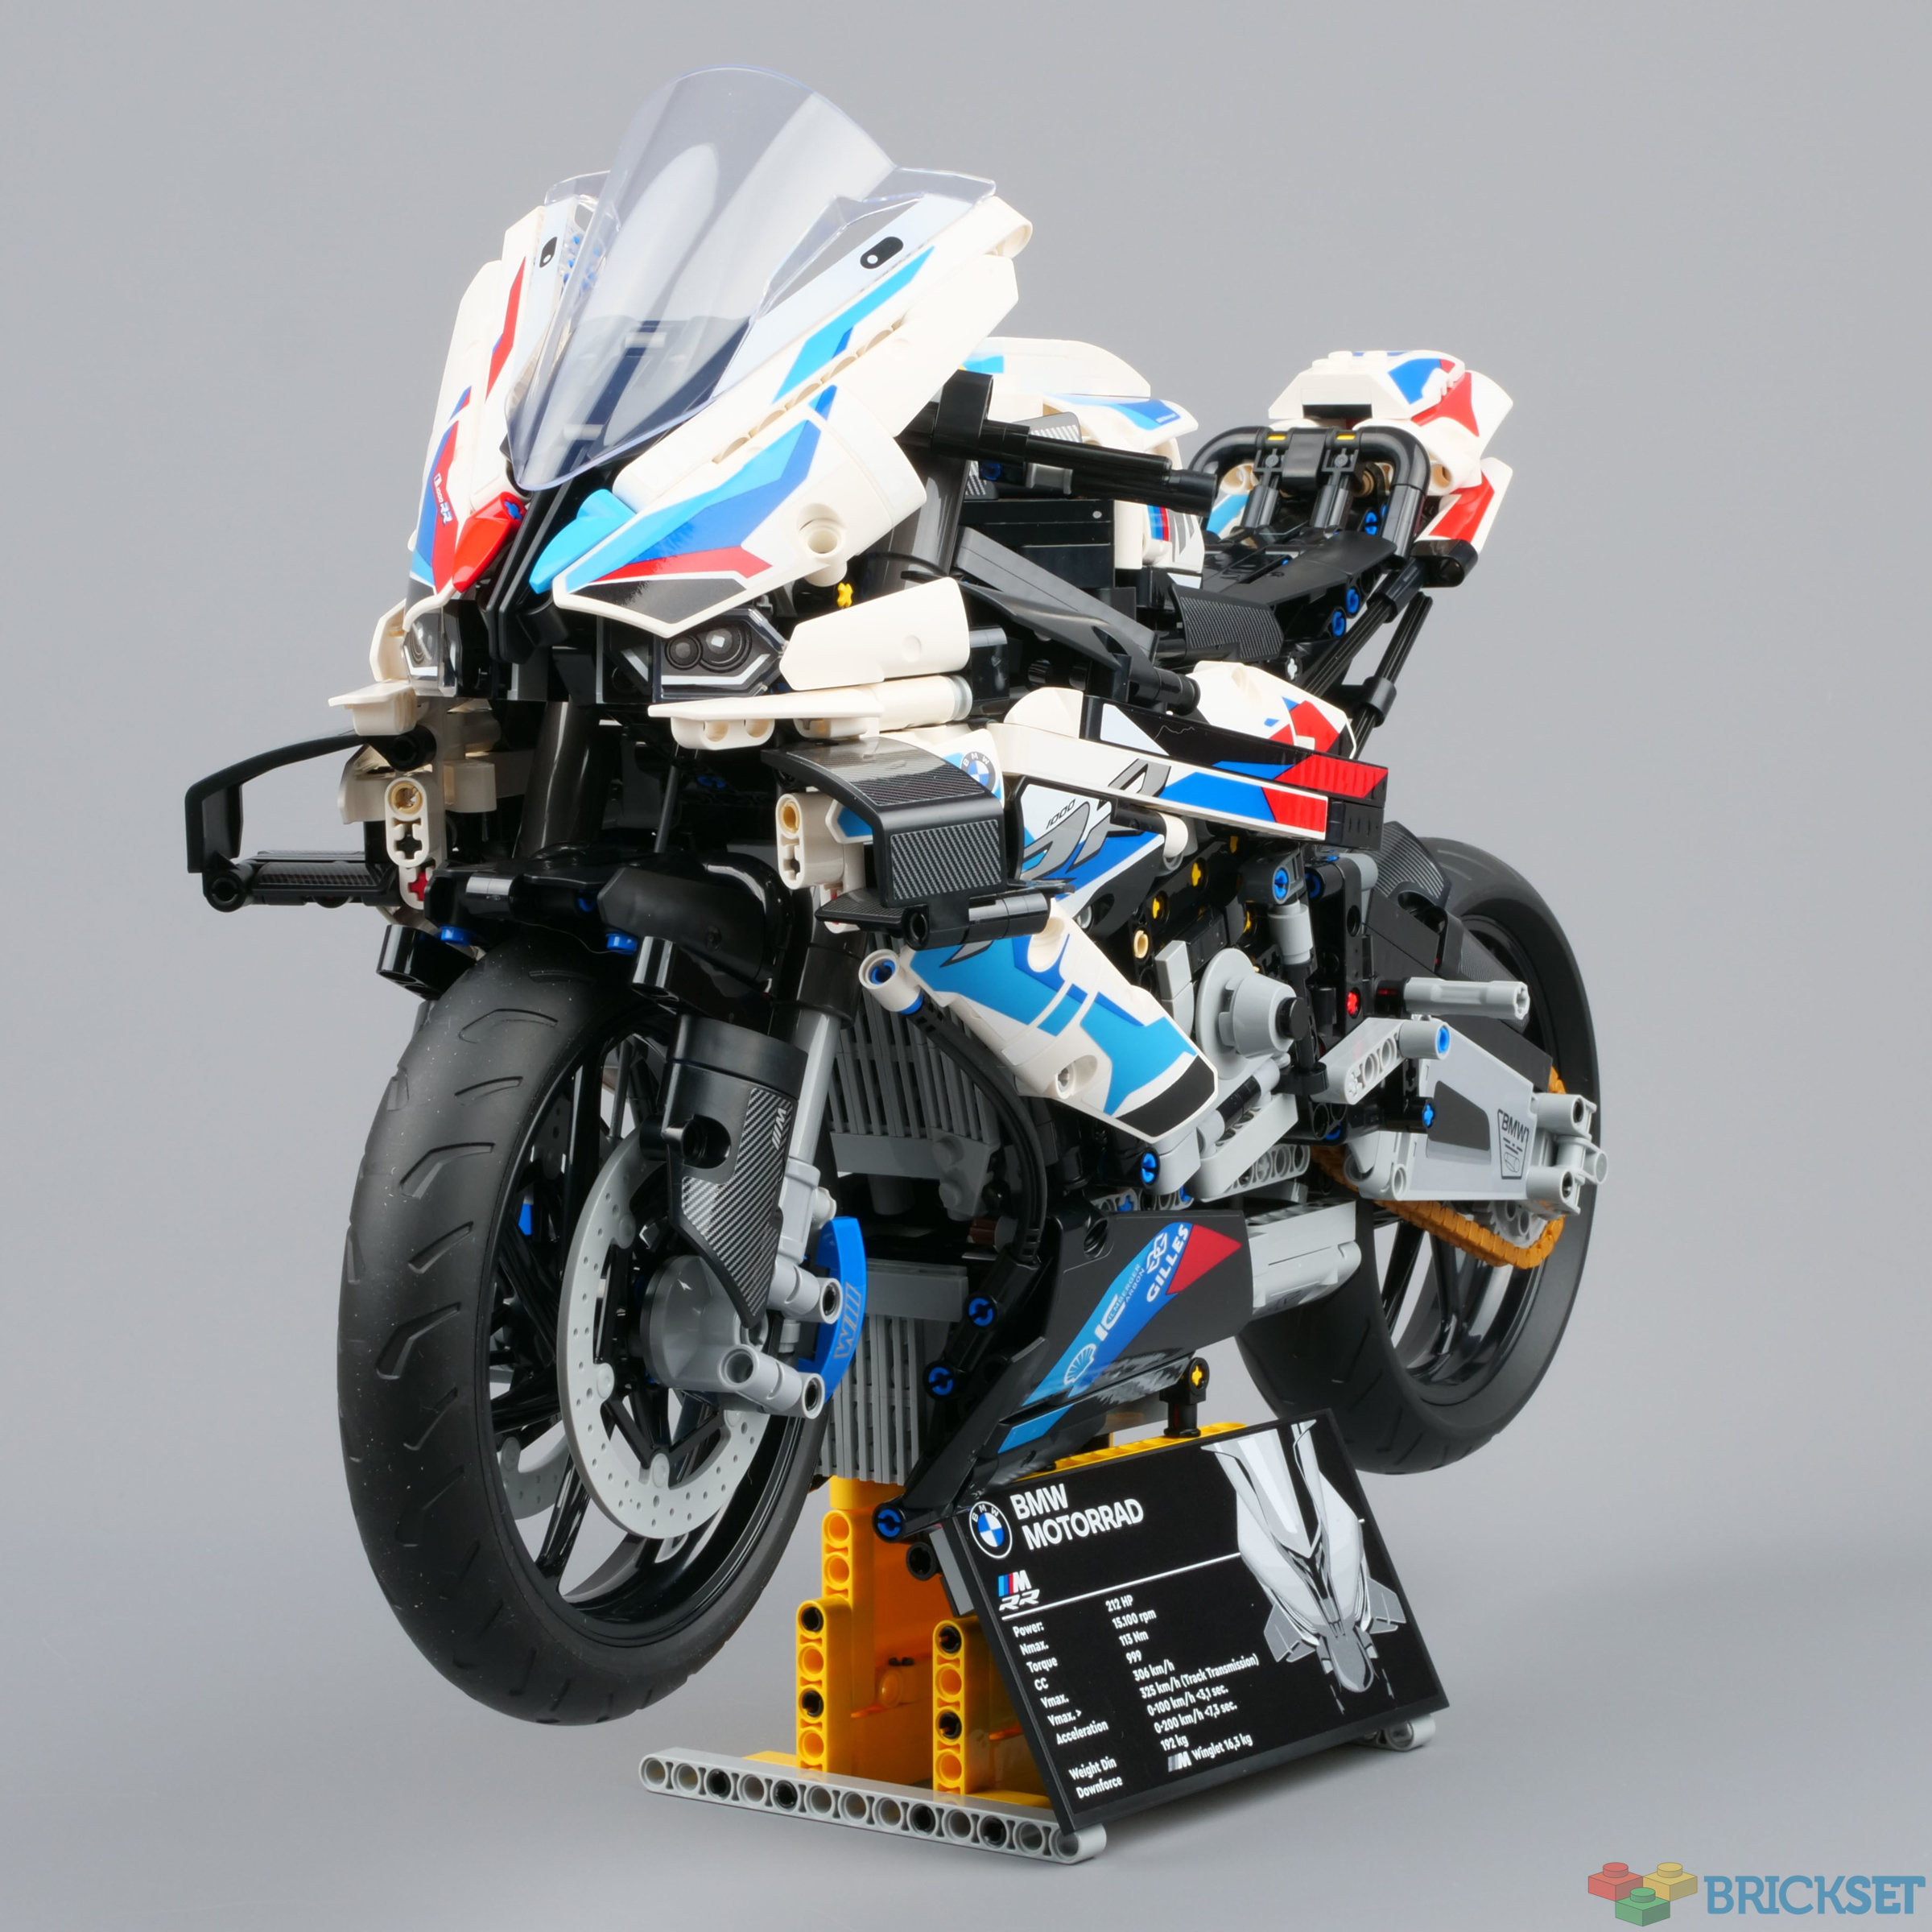 Lego BMW M1000RR Extra pieces? Is it normal to have pieces left